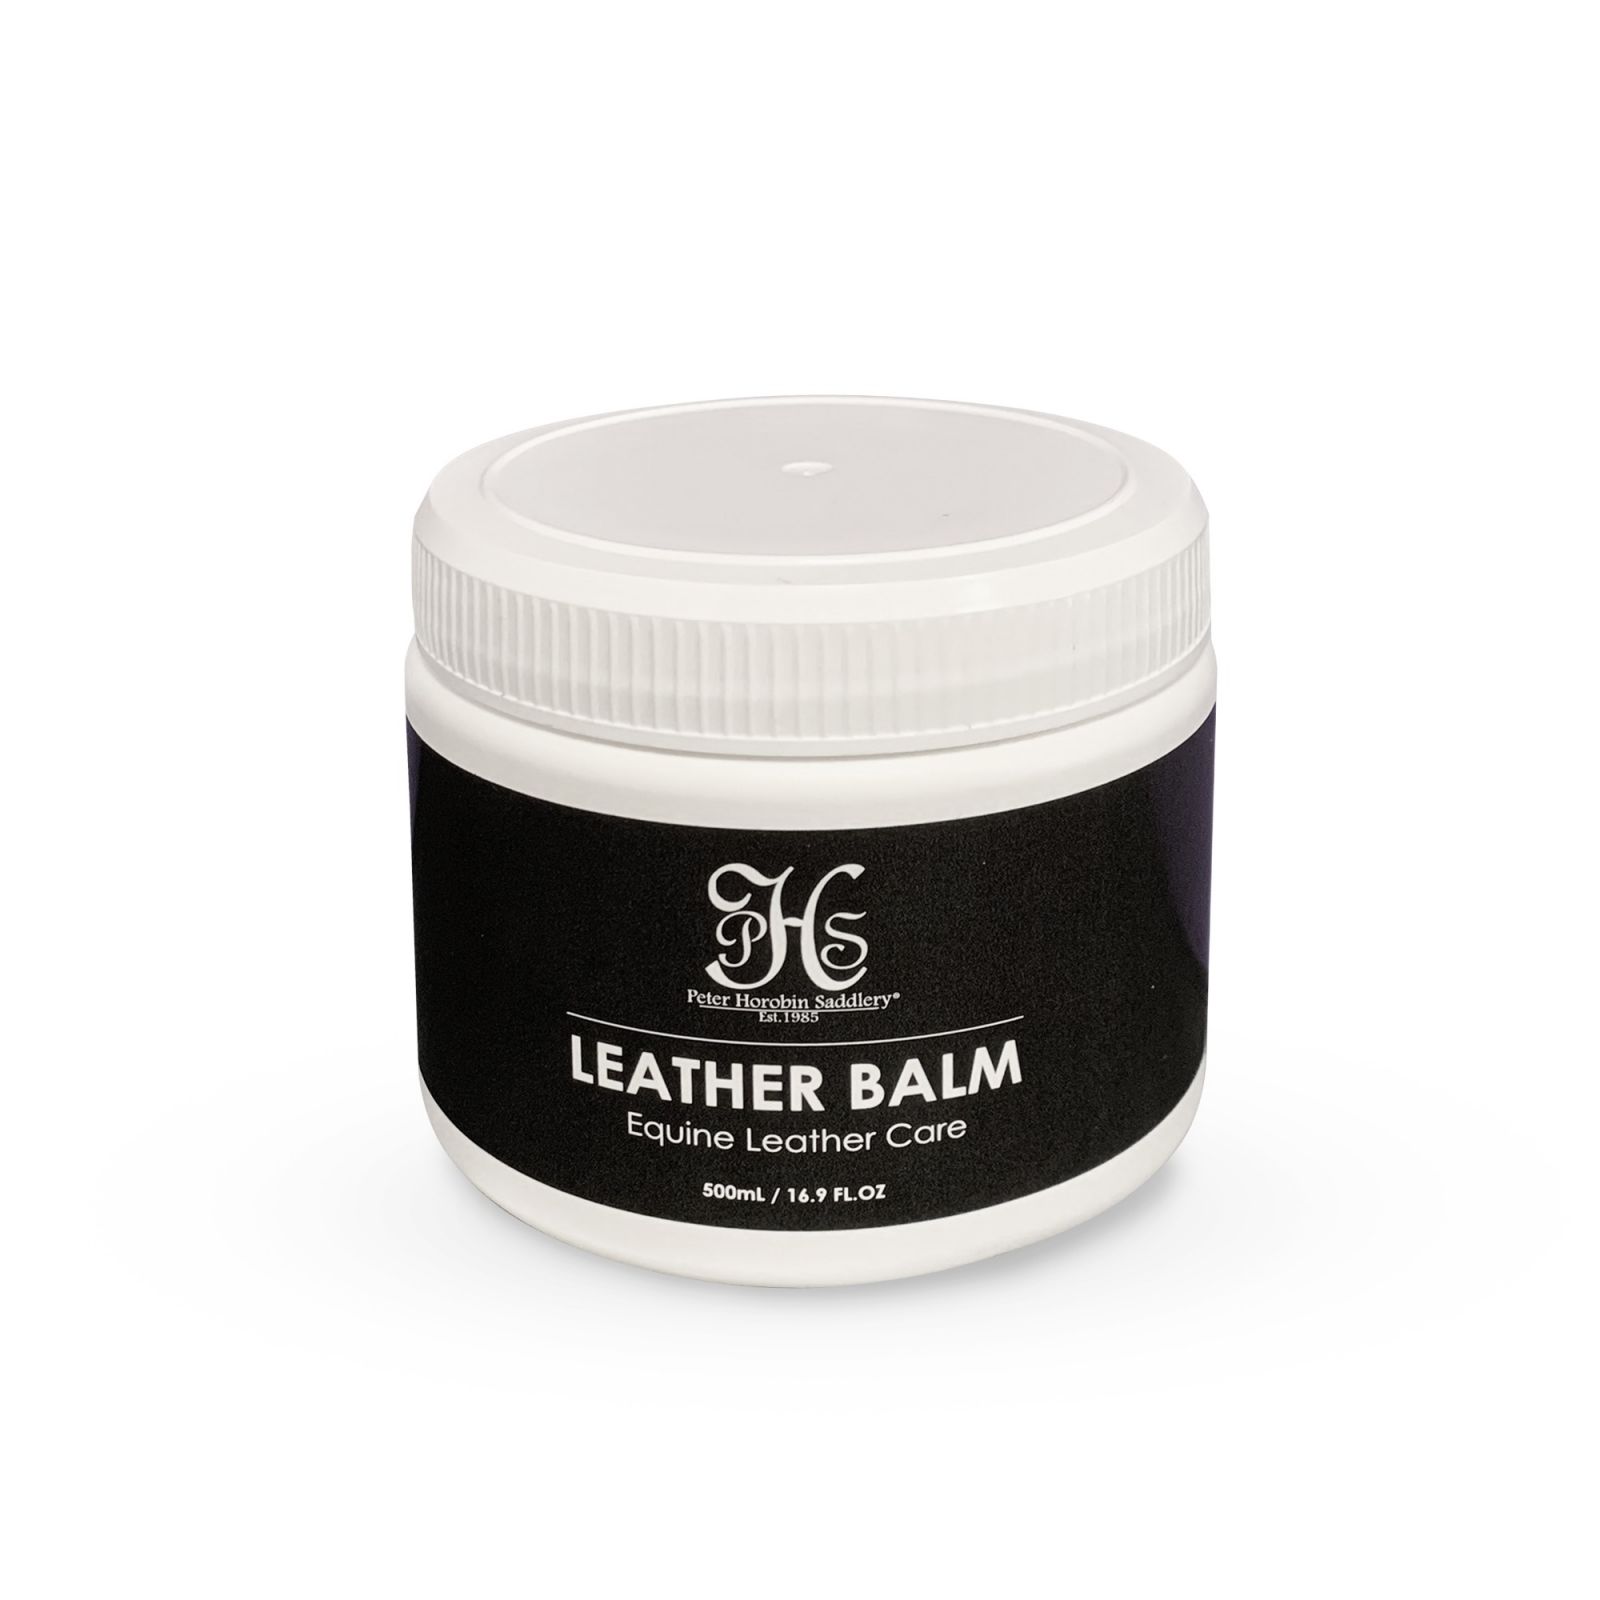 Peter Horobin Leather Balm